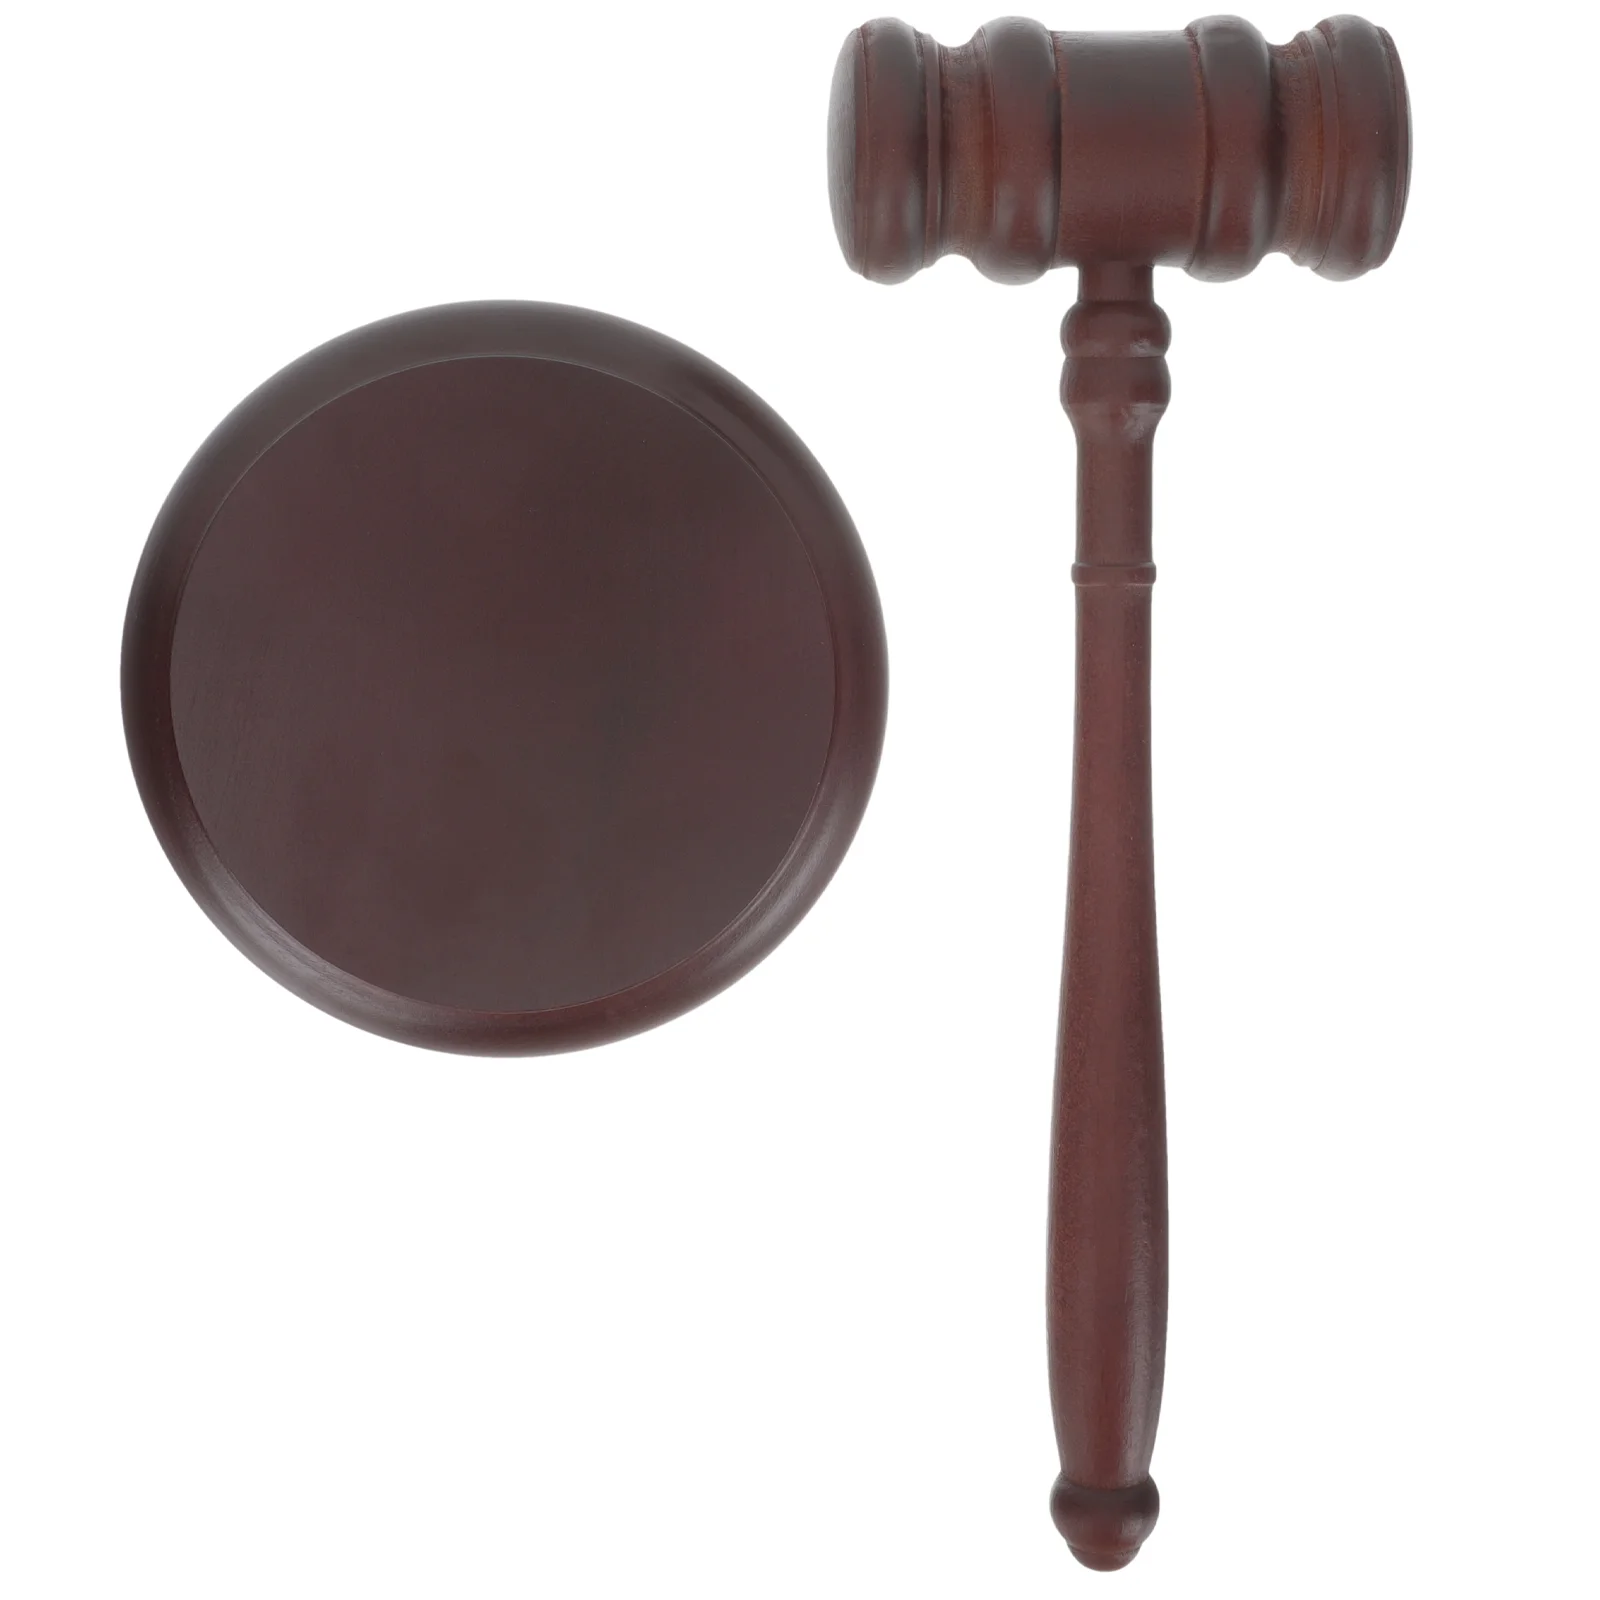 

Judge Hammer Gavel for Toy Official Gavels Toys Children’s Auction Wooden Tool Mini Clothing